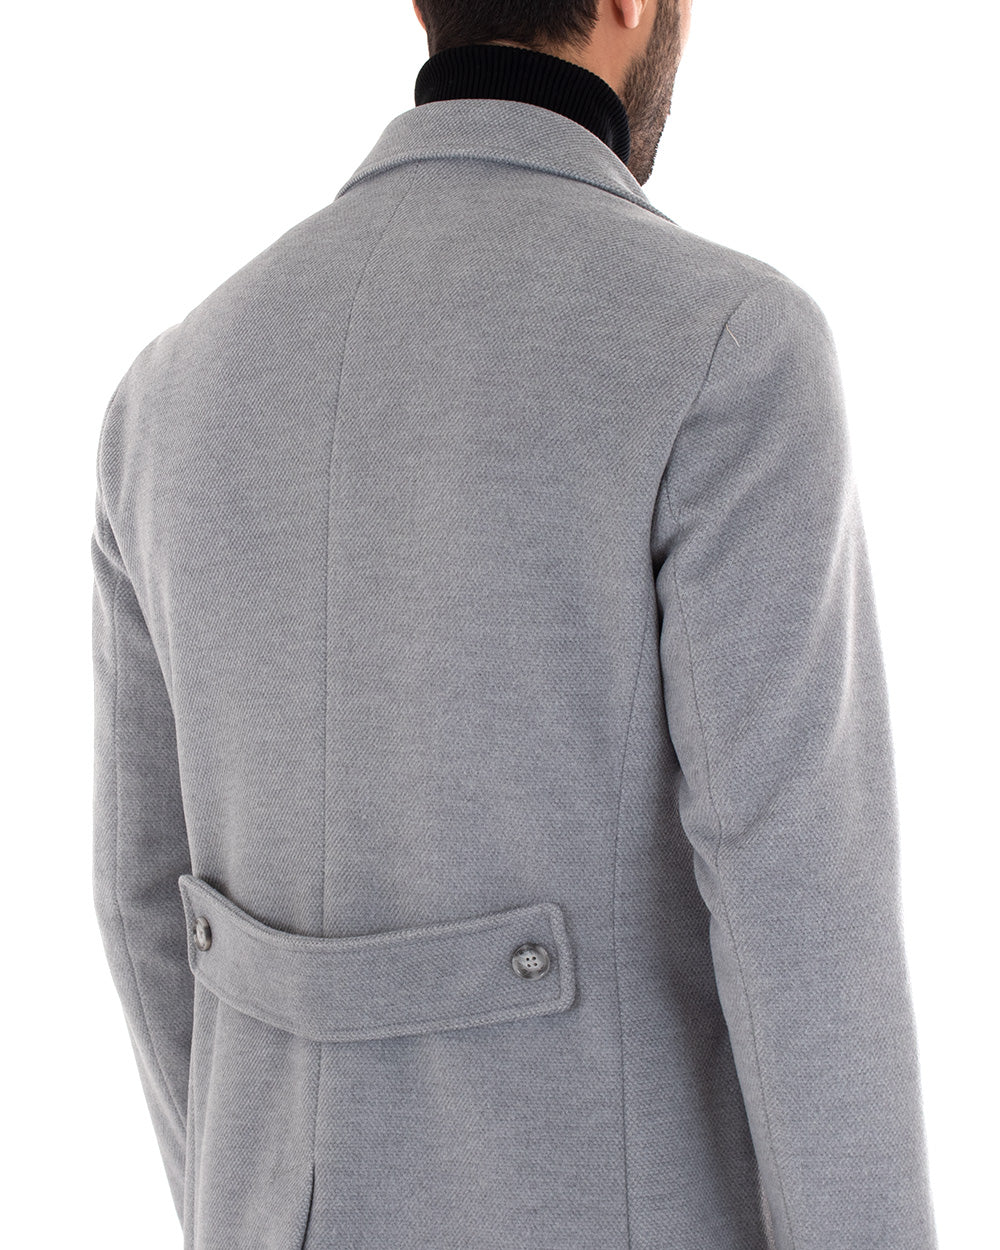 Double-breasted Men's Coat Jacket With Elegant Gray Collar GIOSAL-G2759A